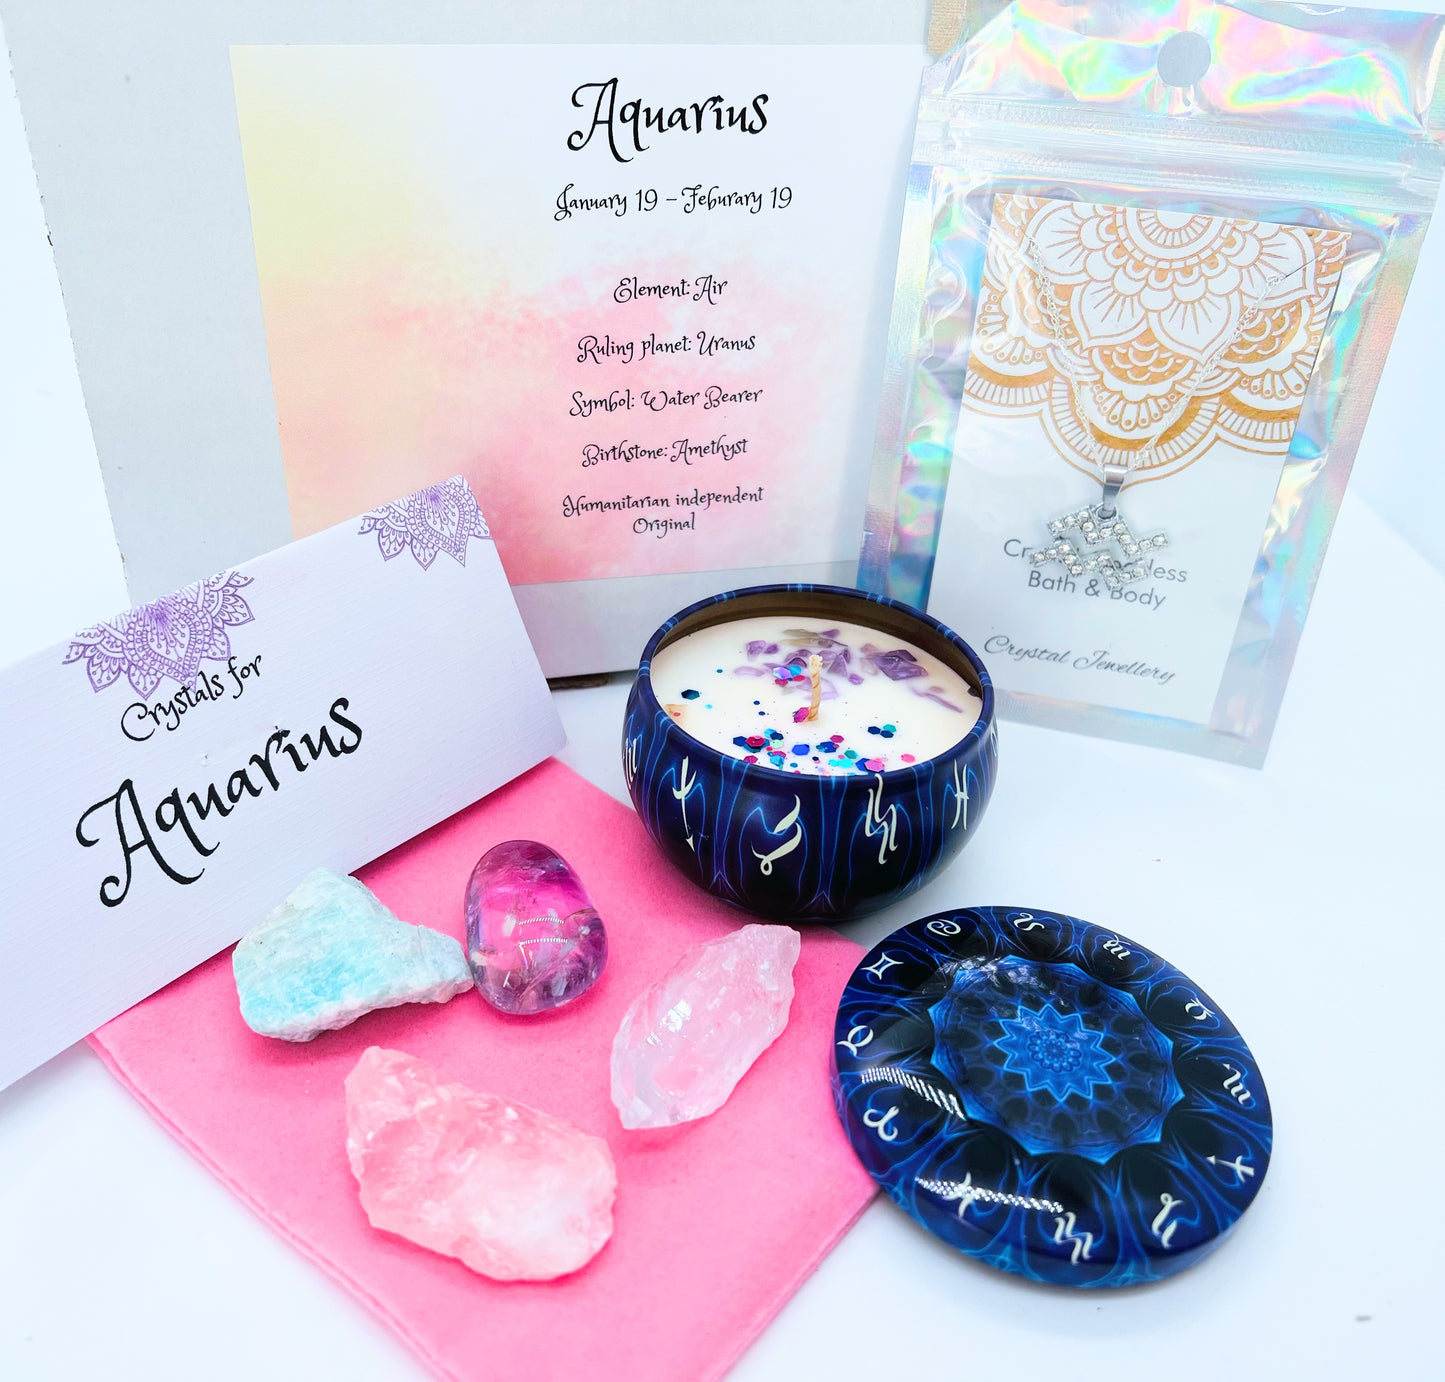 Aquarius Zodiac gift box showing crystals for this sign and pendant necklace and crystal set.